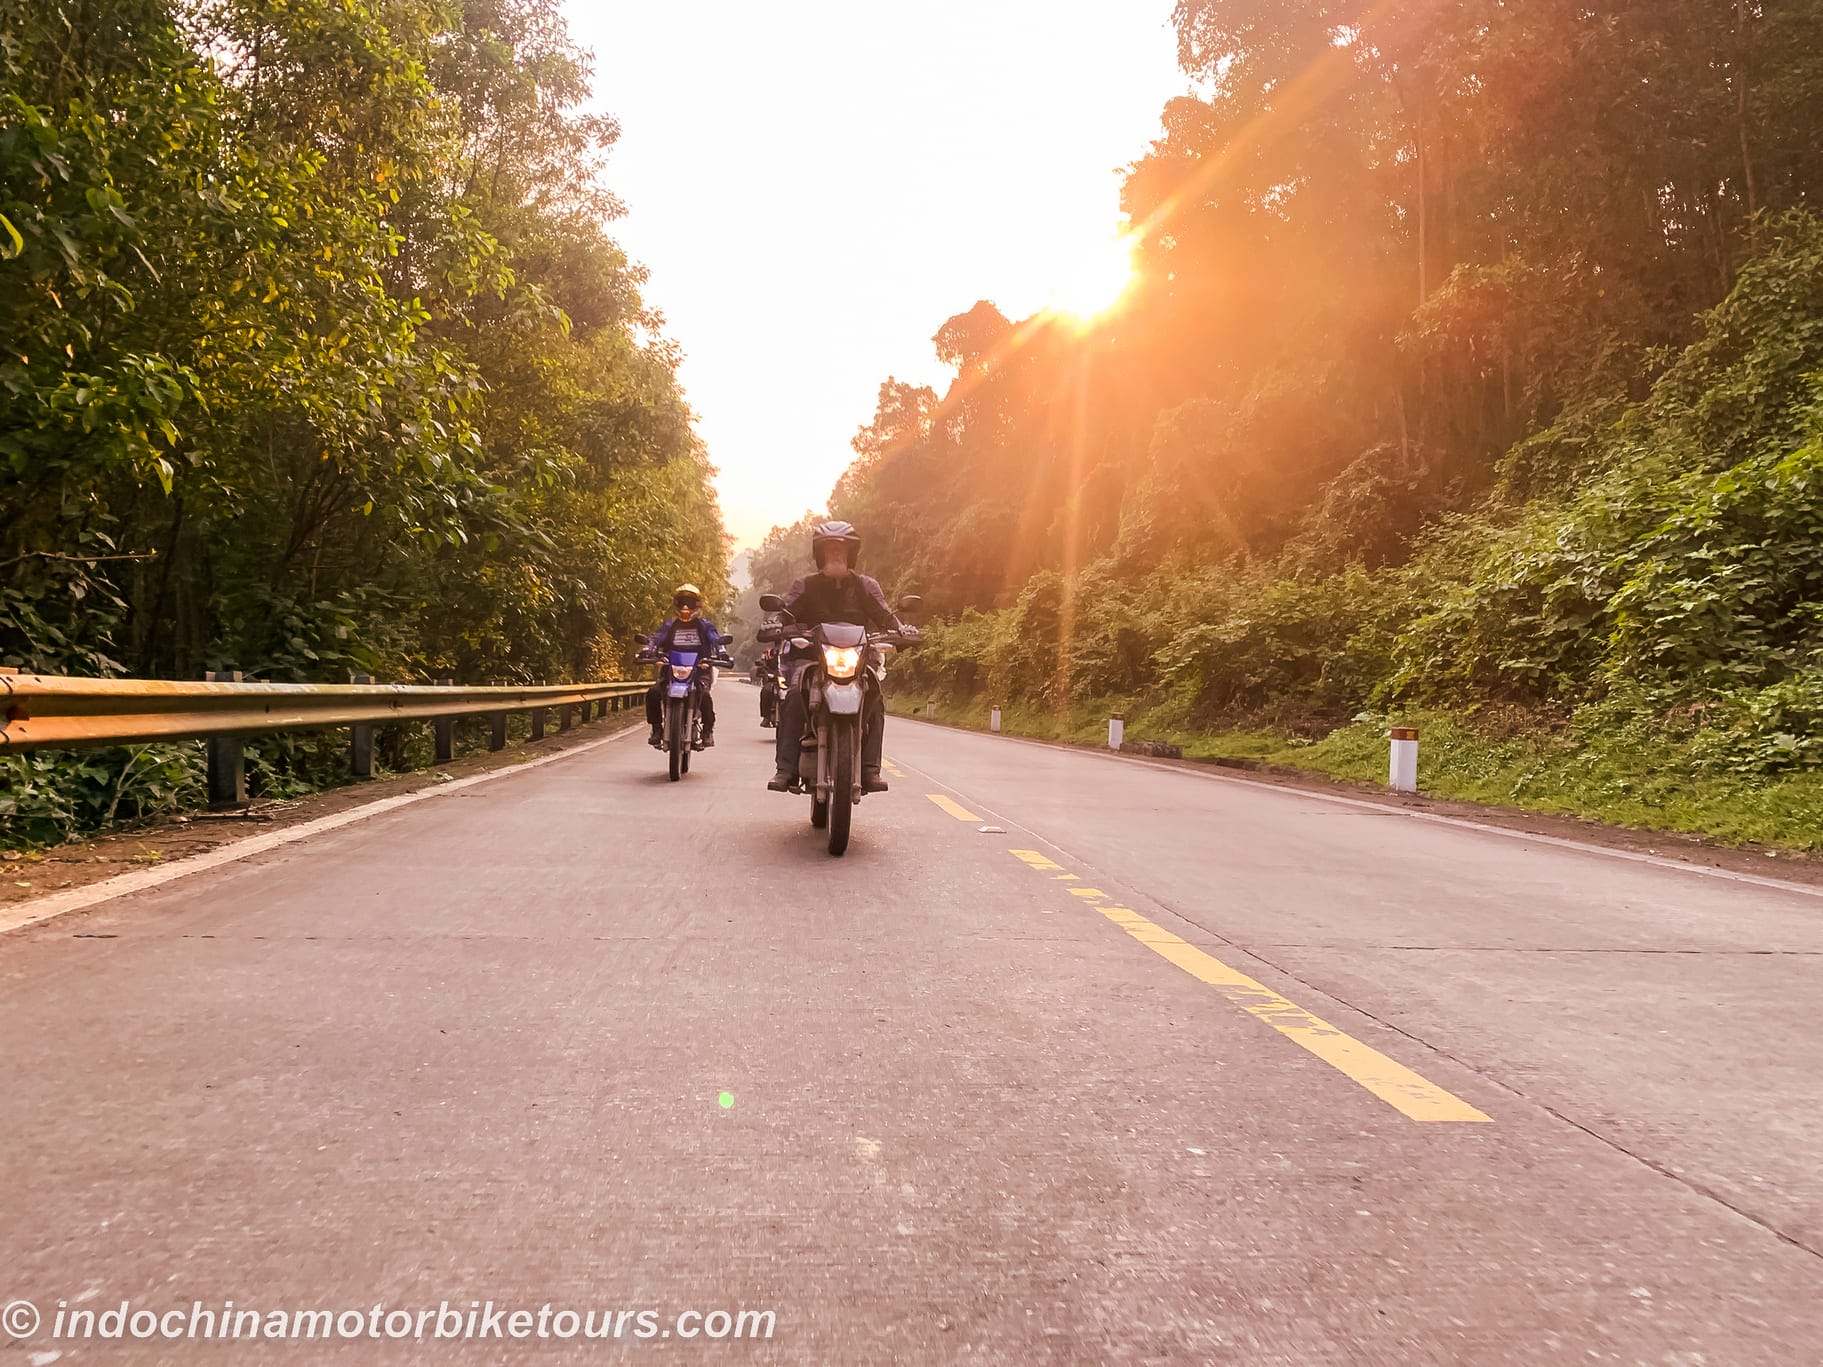 HOI AN LOOP MOTORCYCLE TOUR VIA CENTRAL HIGHLANDS WITH BEACH BREAKS